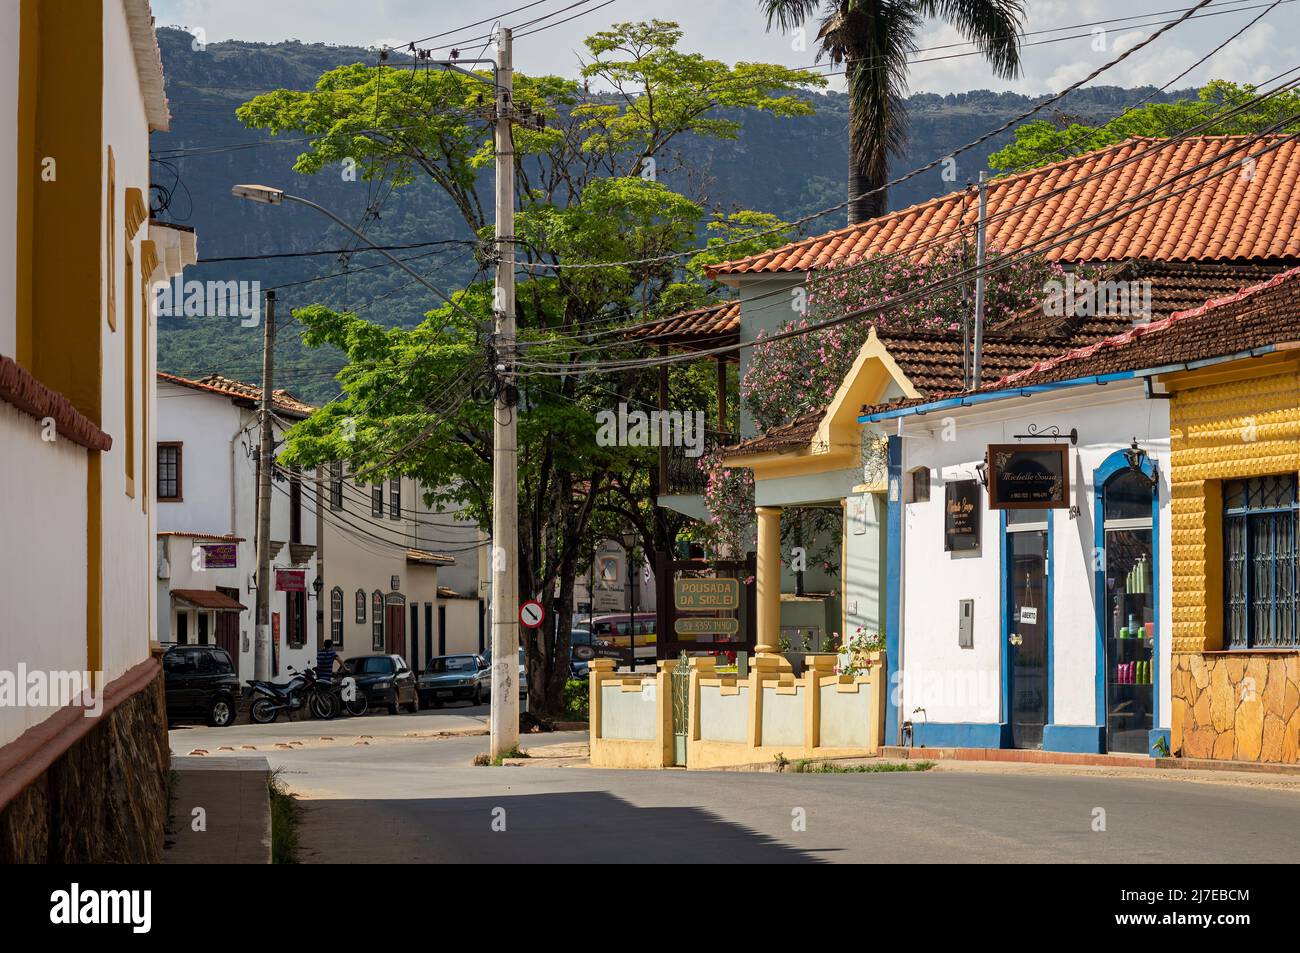 Various inns running in colorful colonial houses located at Antonio Teixeira Carvalho street, nearby historical center under clouded sunny sky. Stock Photo